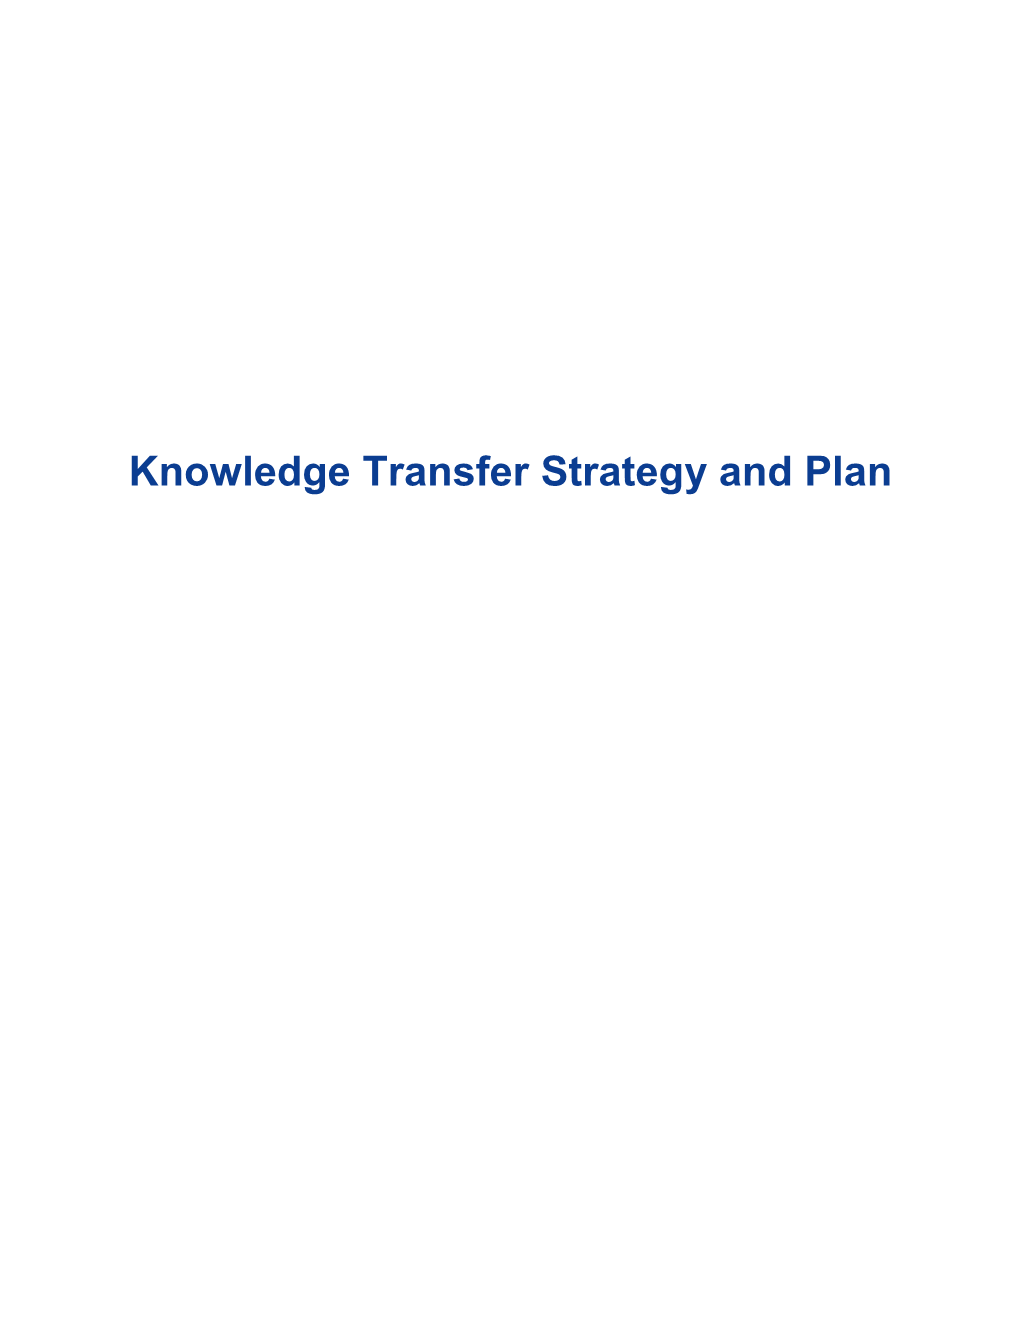 Knowledge Transfer Plan Will Help Make the Process More Efficient and Effective